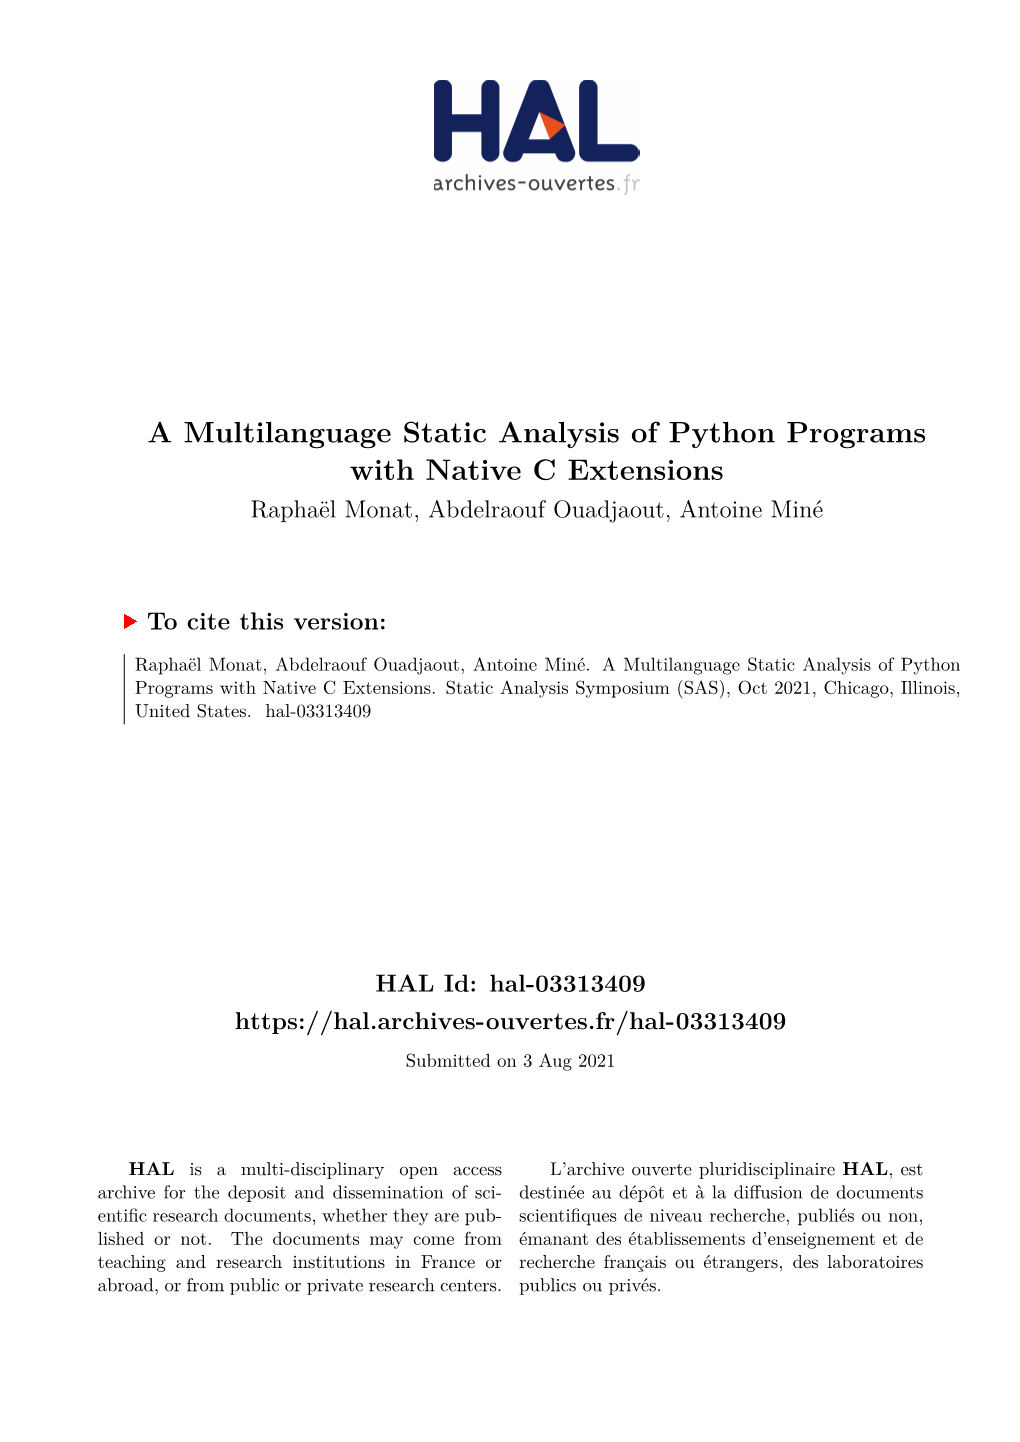 A Multilanguage Static Analysis of Python Programs with Native C Extensions Raphaël Monat, Abdelraouf Ouadjaout, Antoine Miné